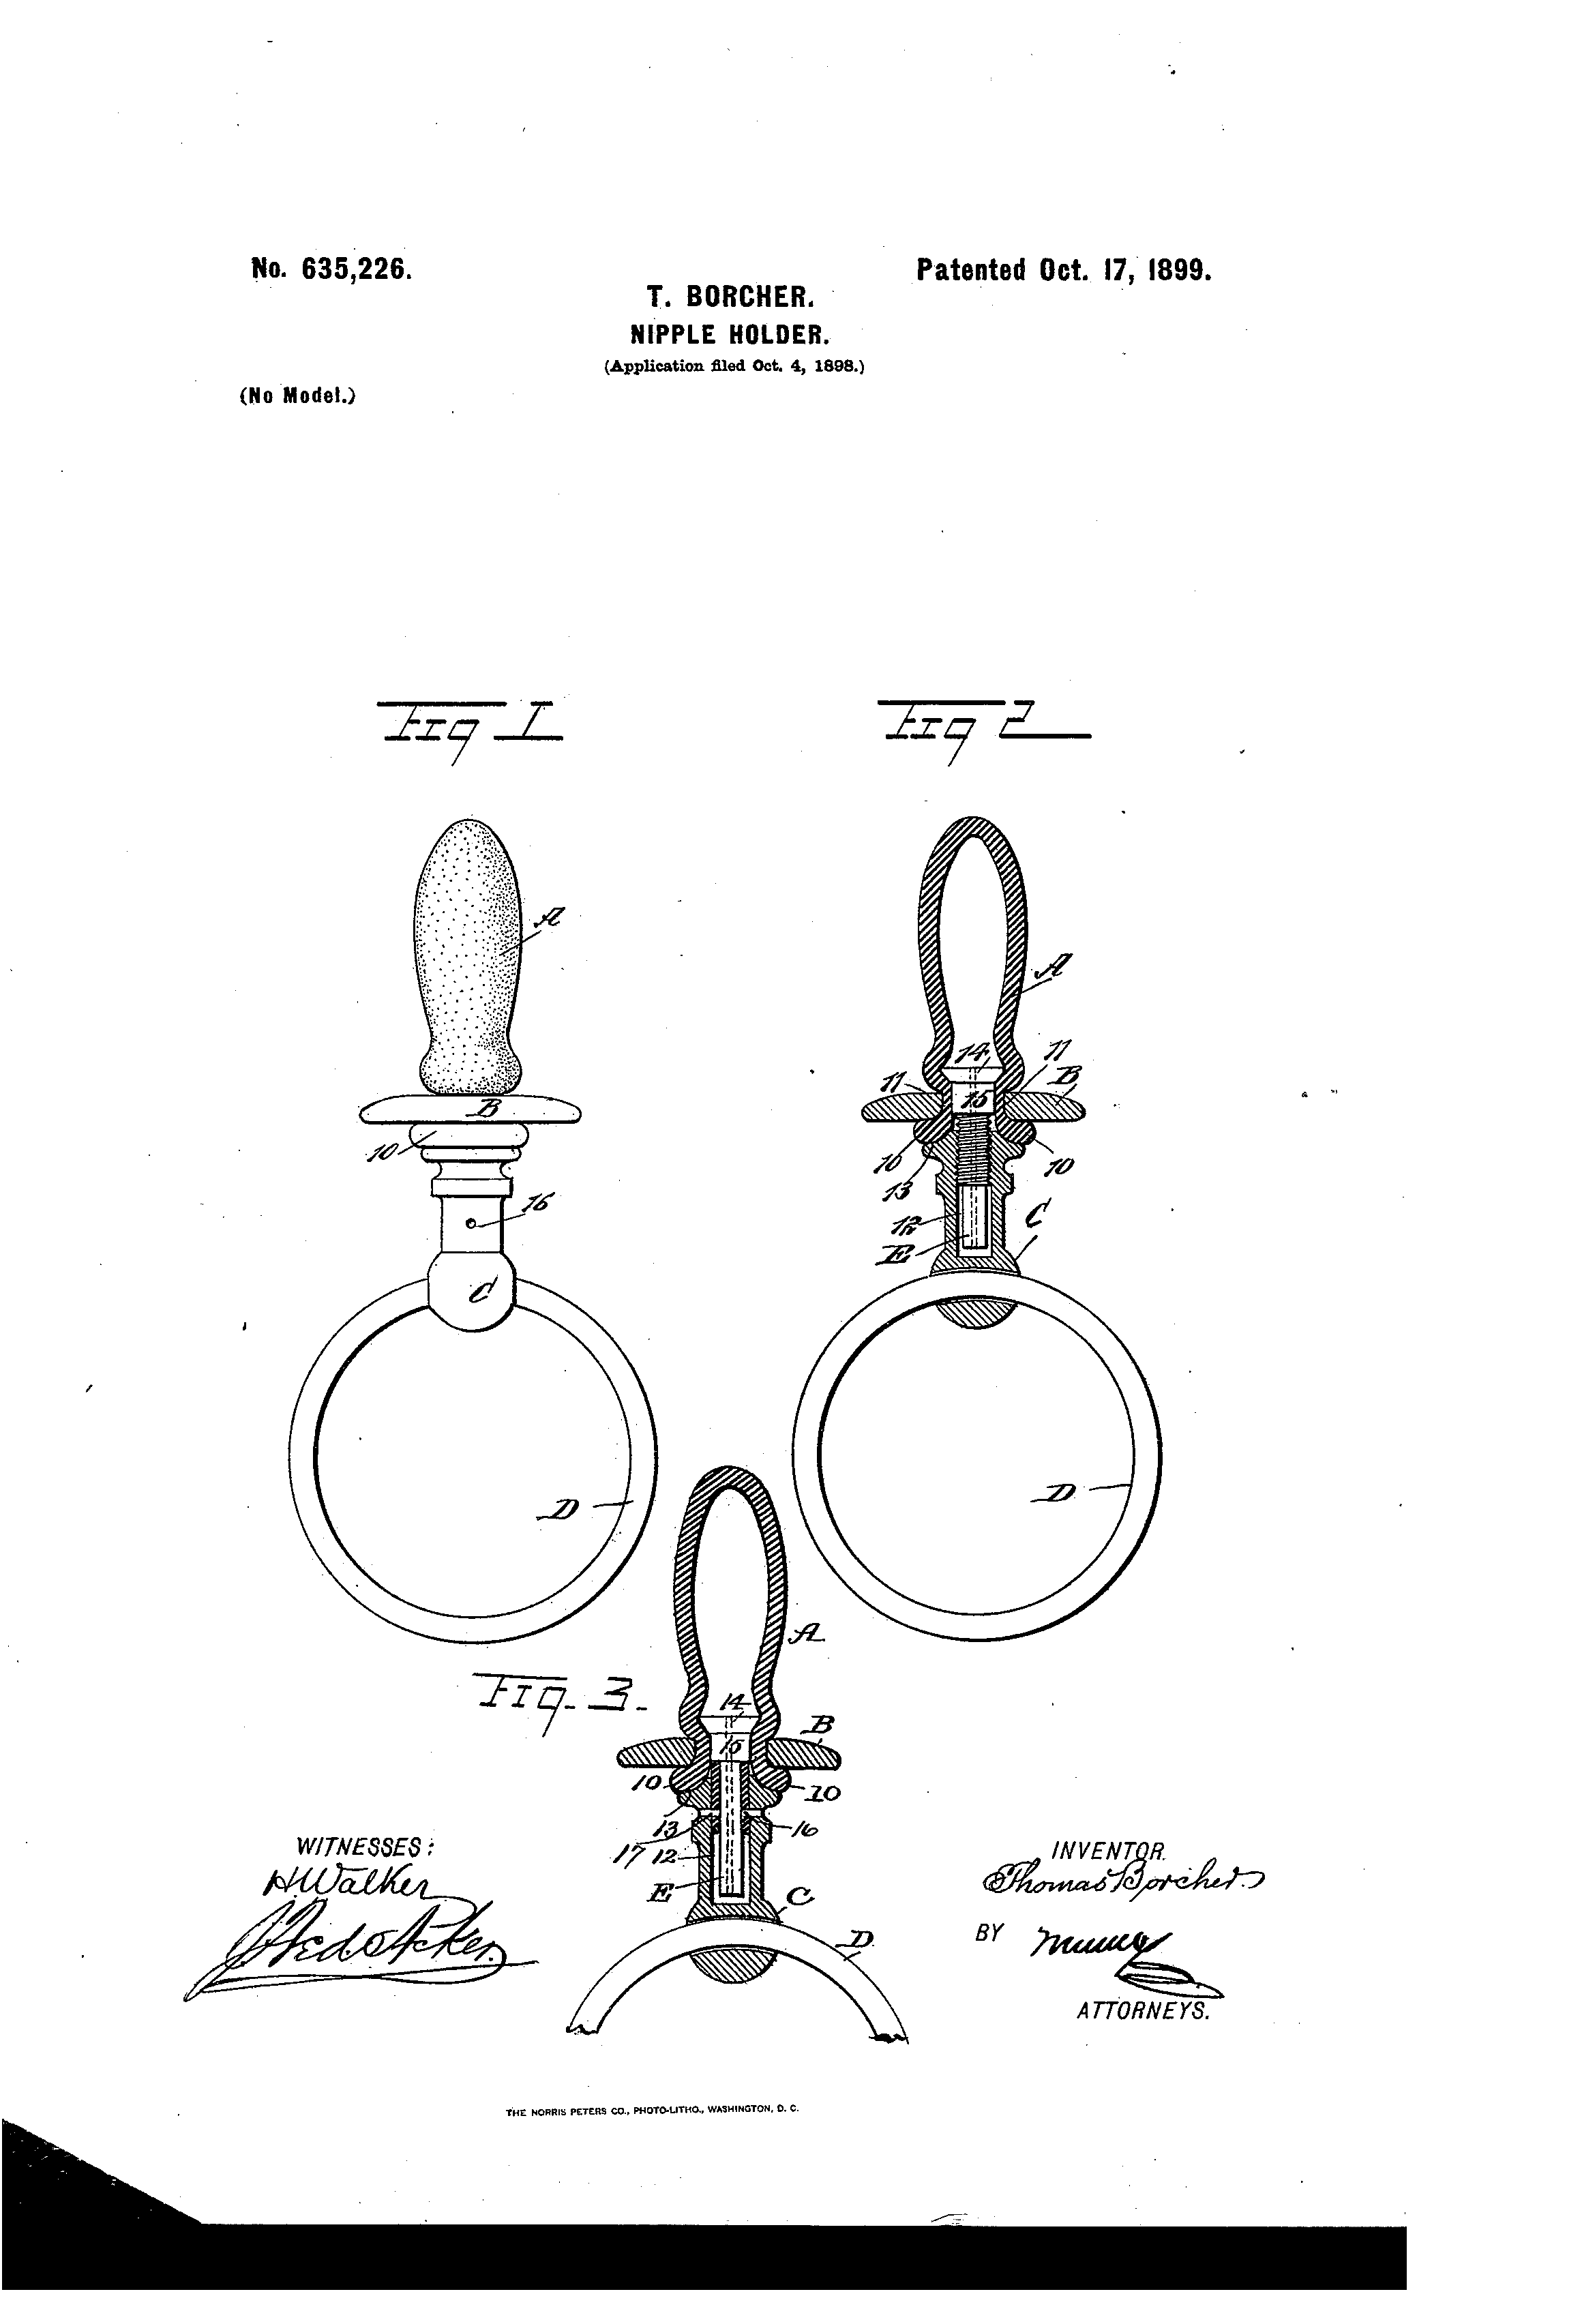 Baby pacifier patent